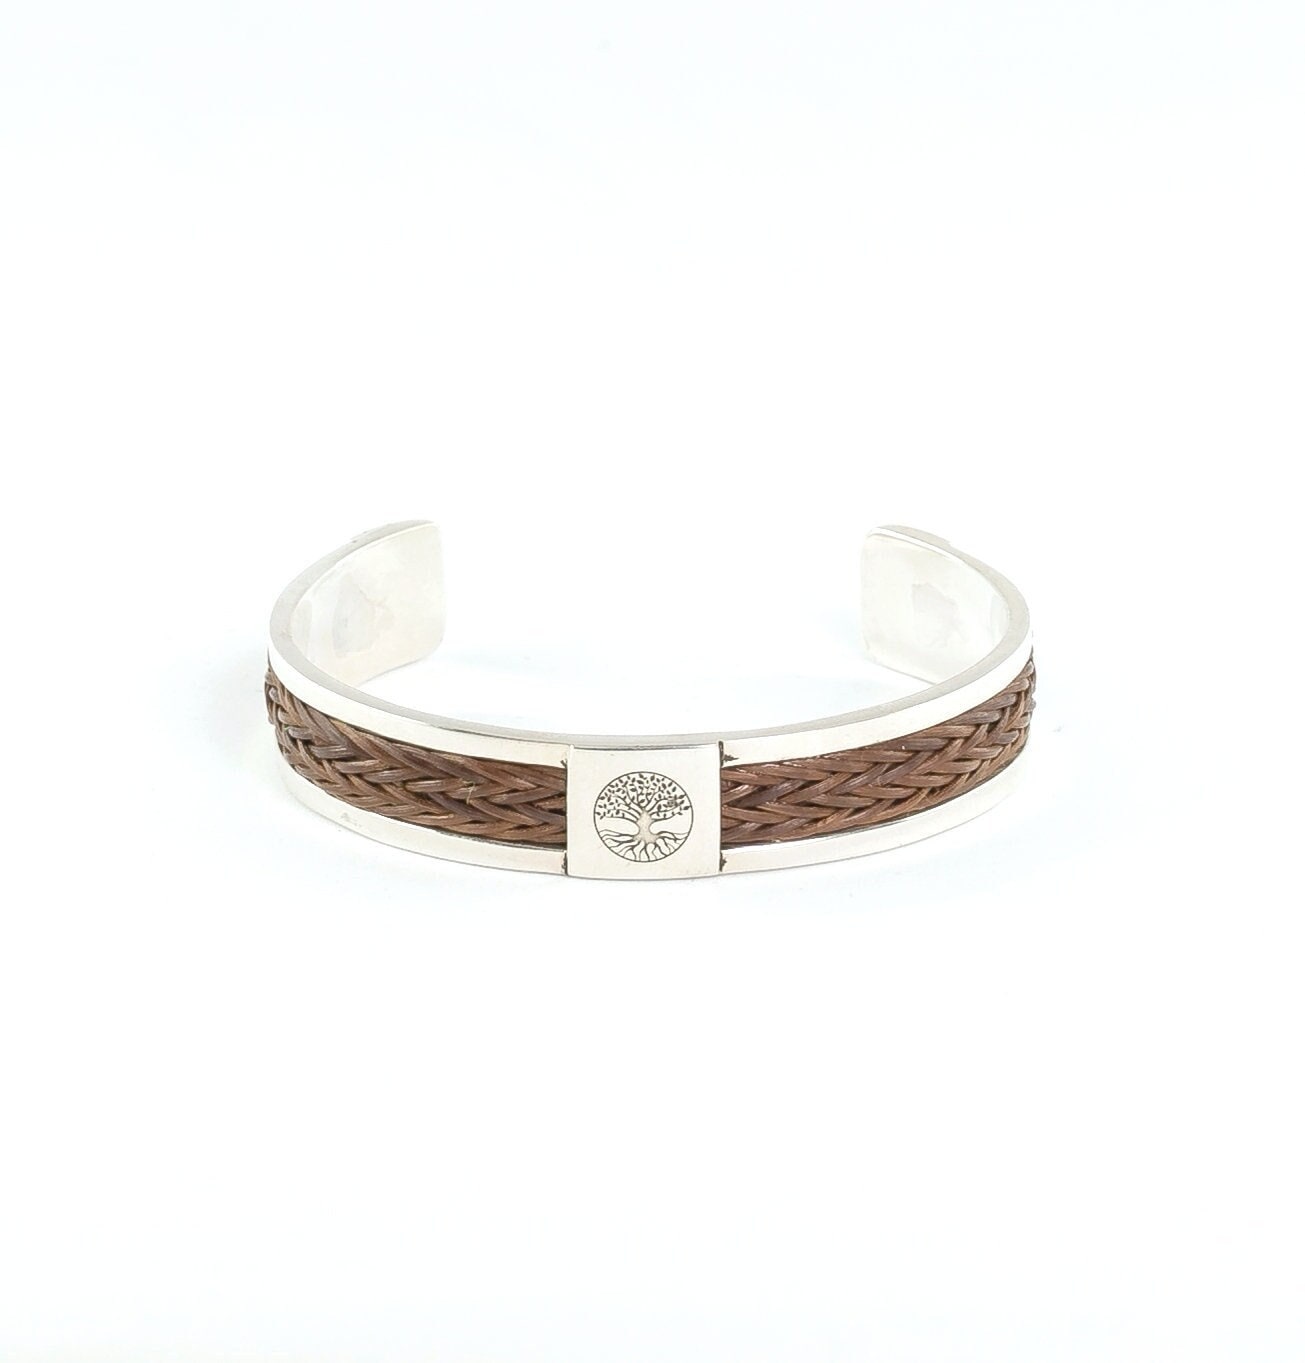 Unisex Bracelet Logo Tree of Life in Silver 925 Cuff jonc with Braiding Natural Vegetable Leather